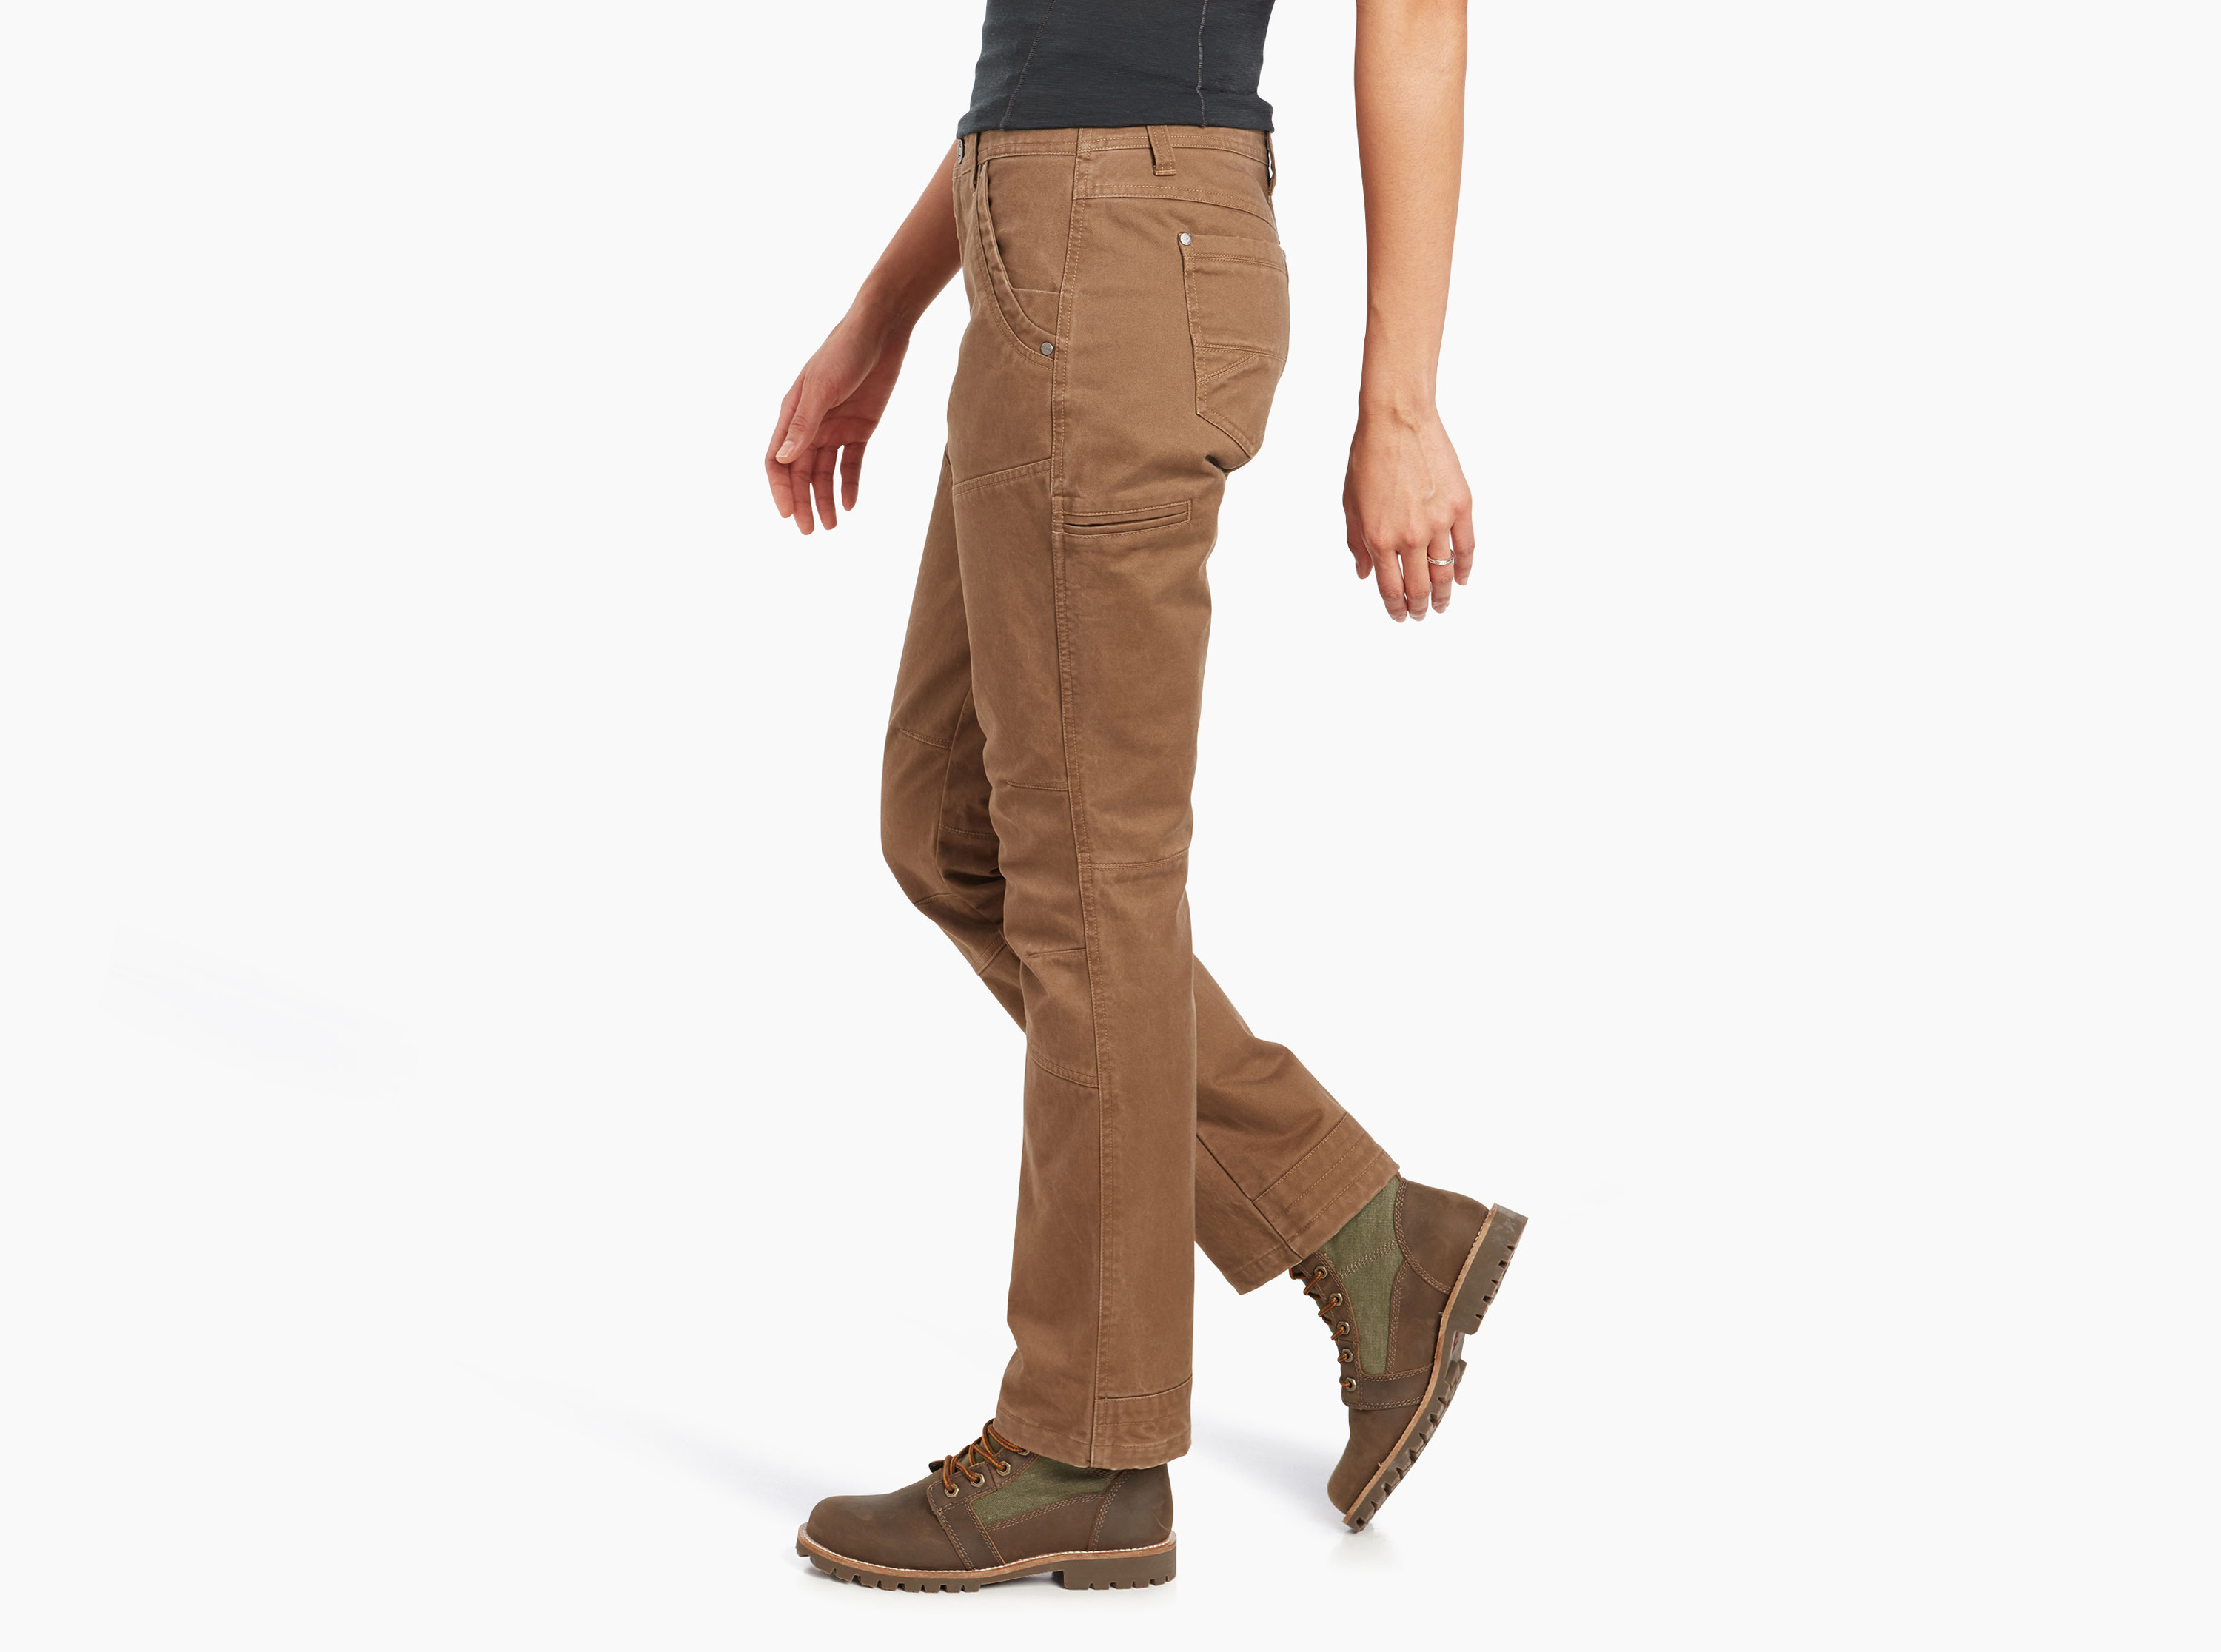 Rydr™ Pant in Women's Pants